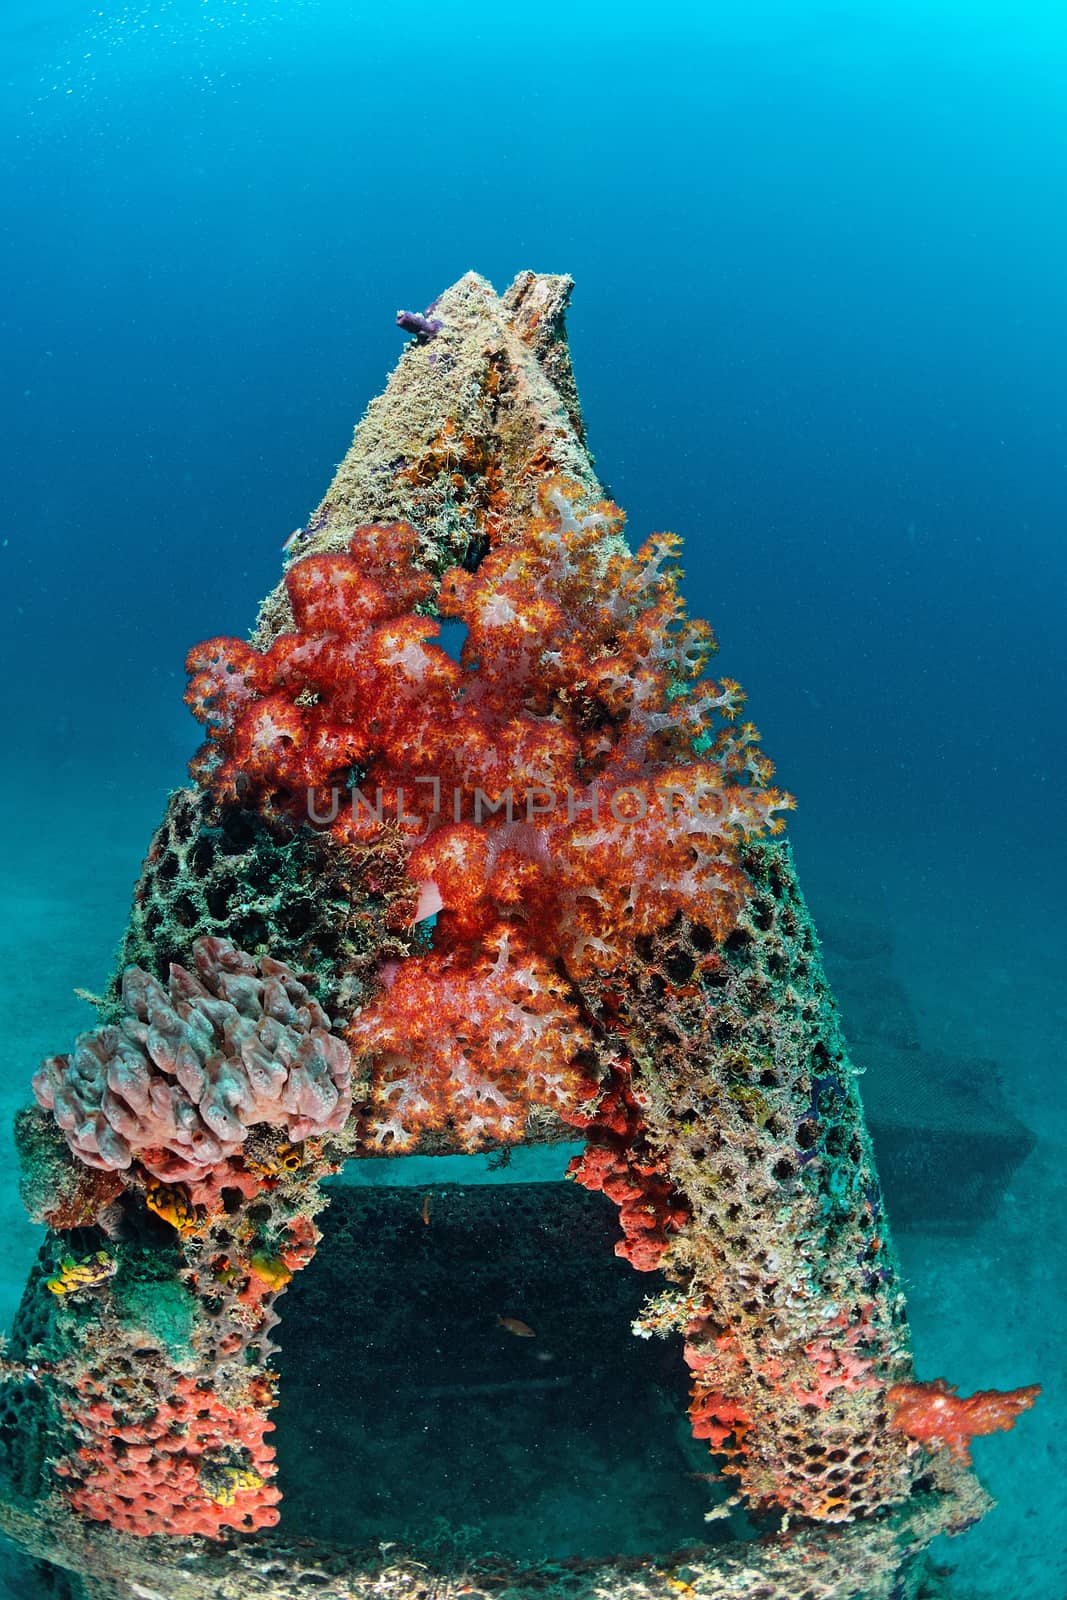 Softcoral on artificial reef in Mabul, kapalai, Malaysia